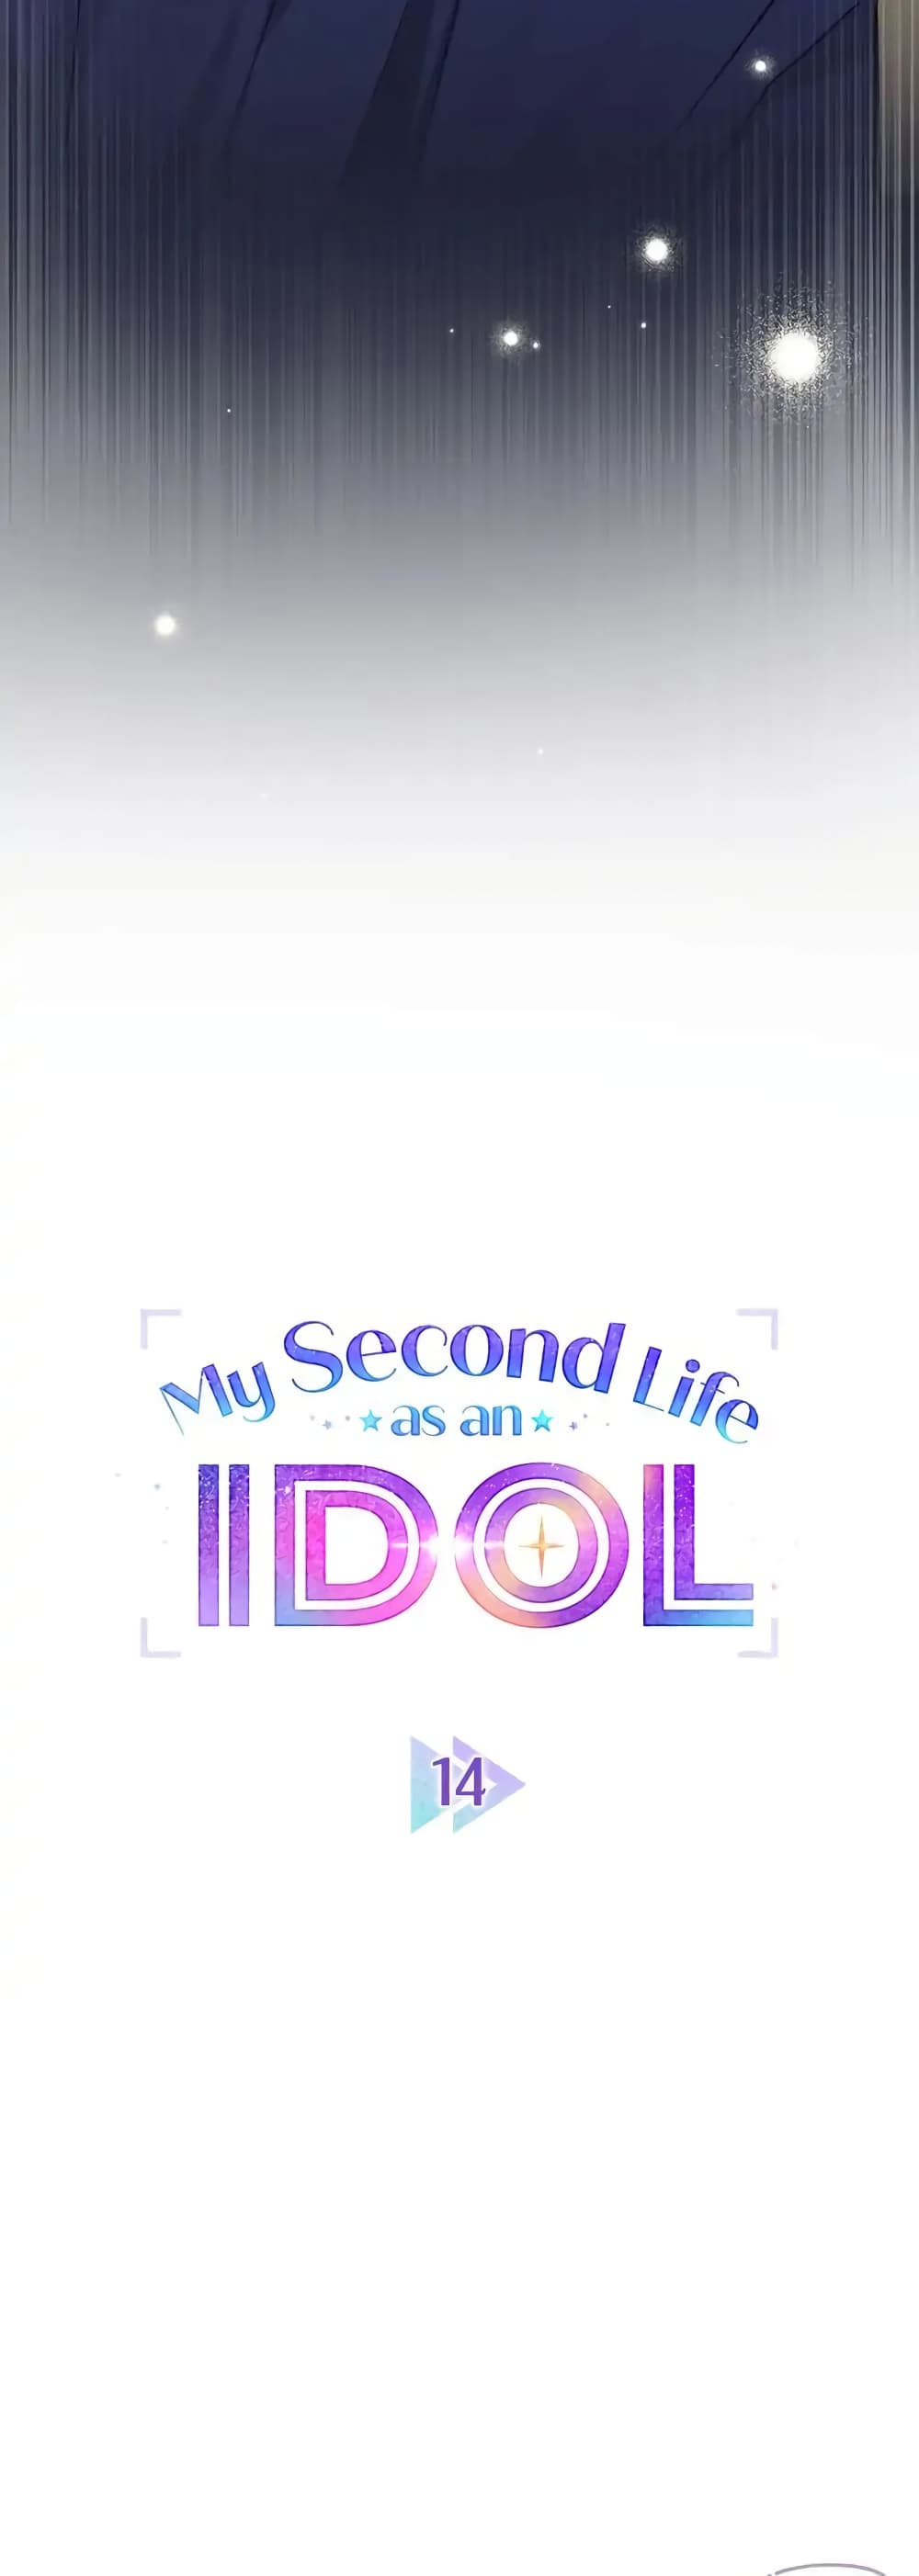 My Second Life as an Idol 14-14